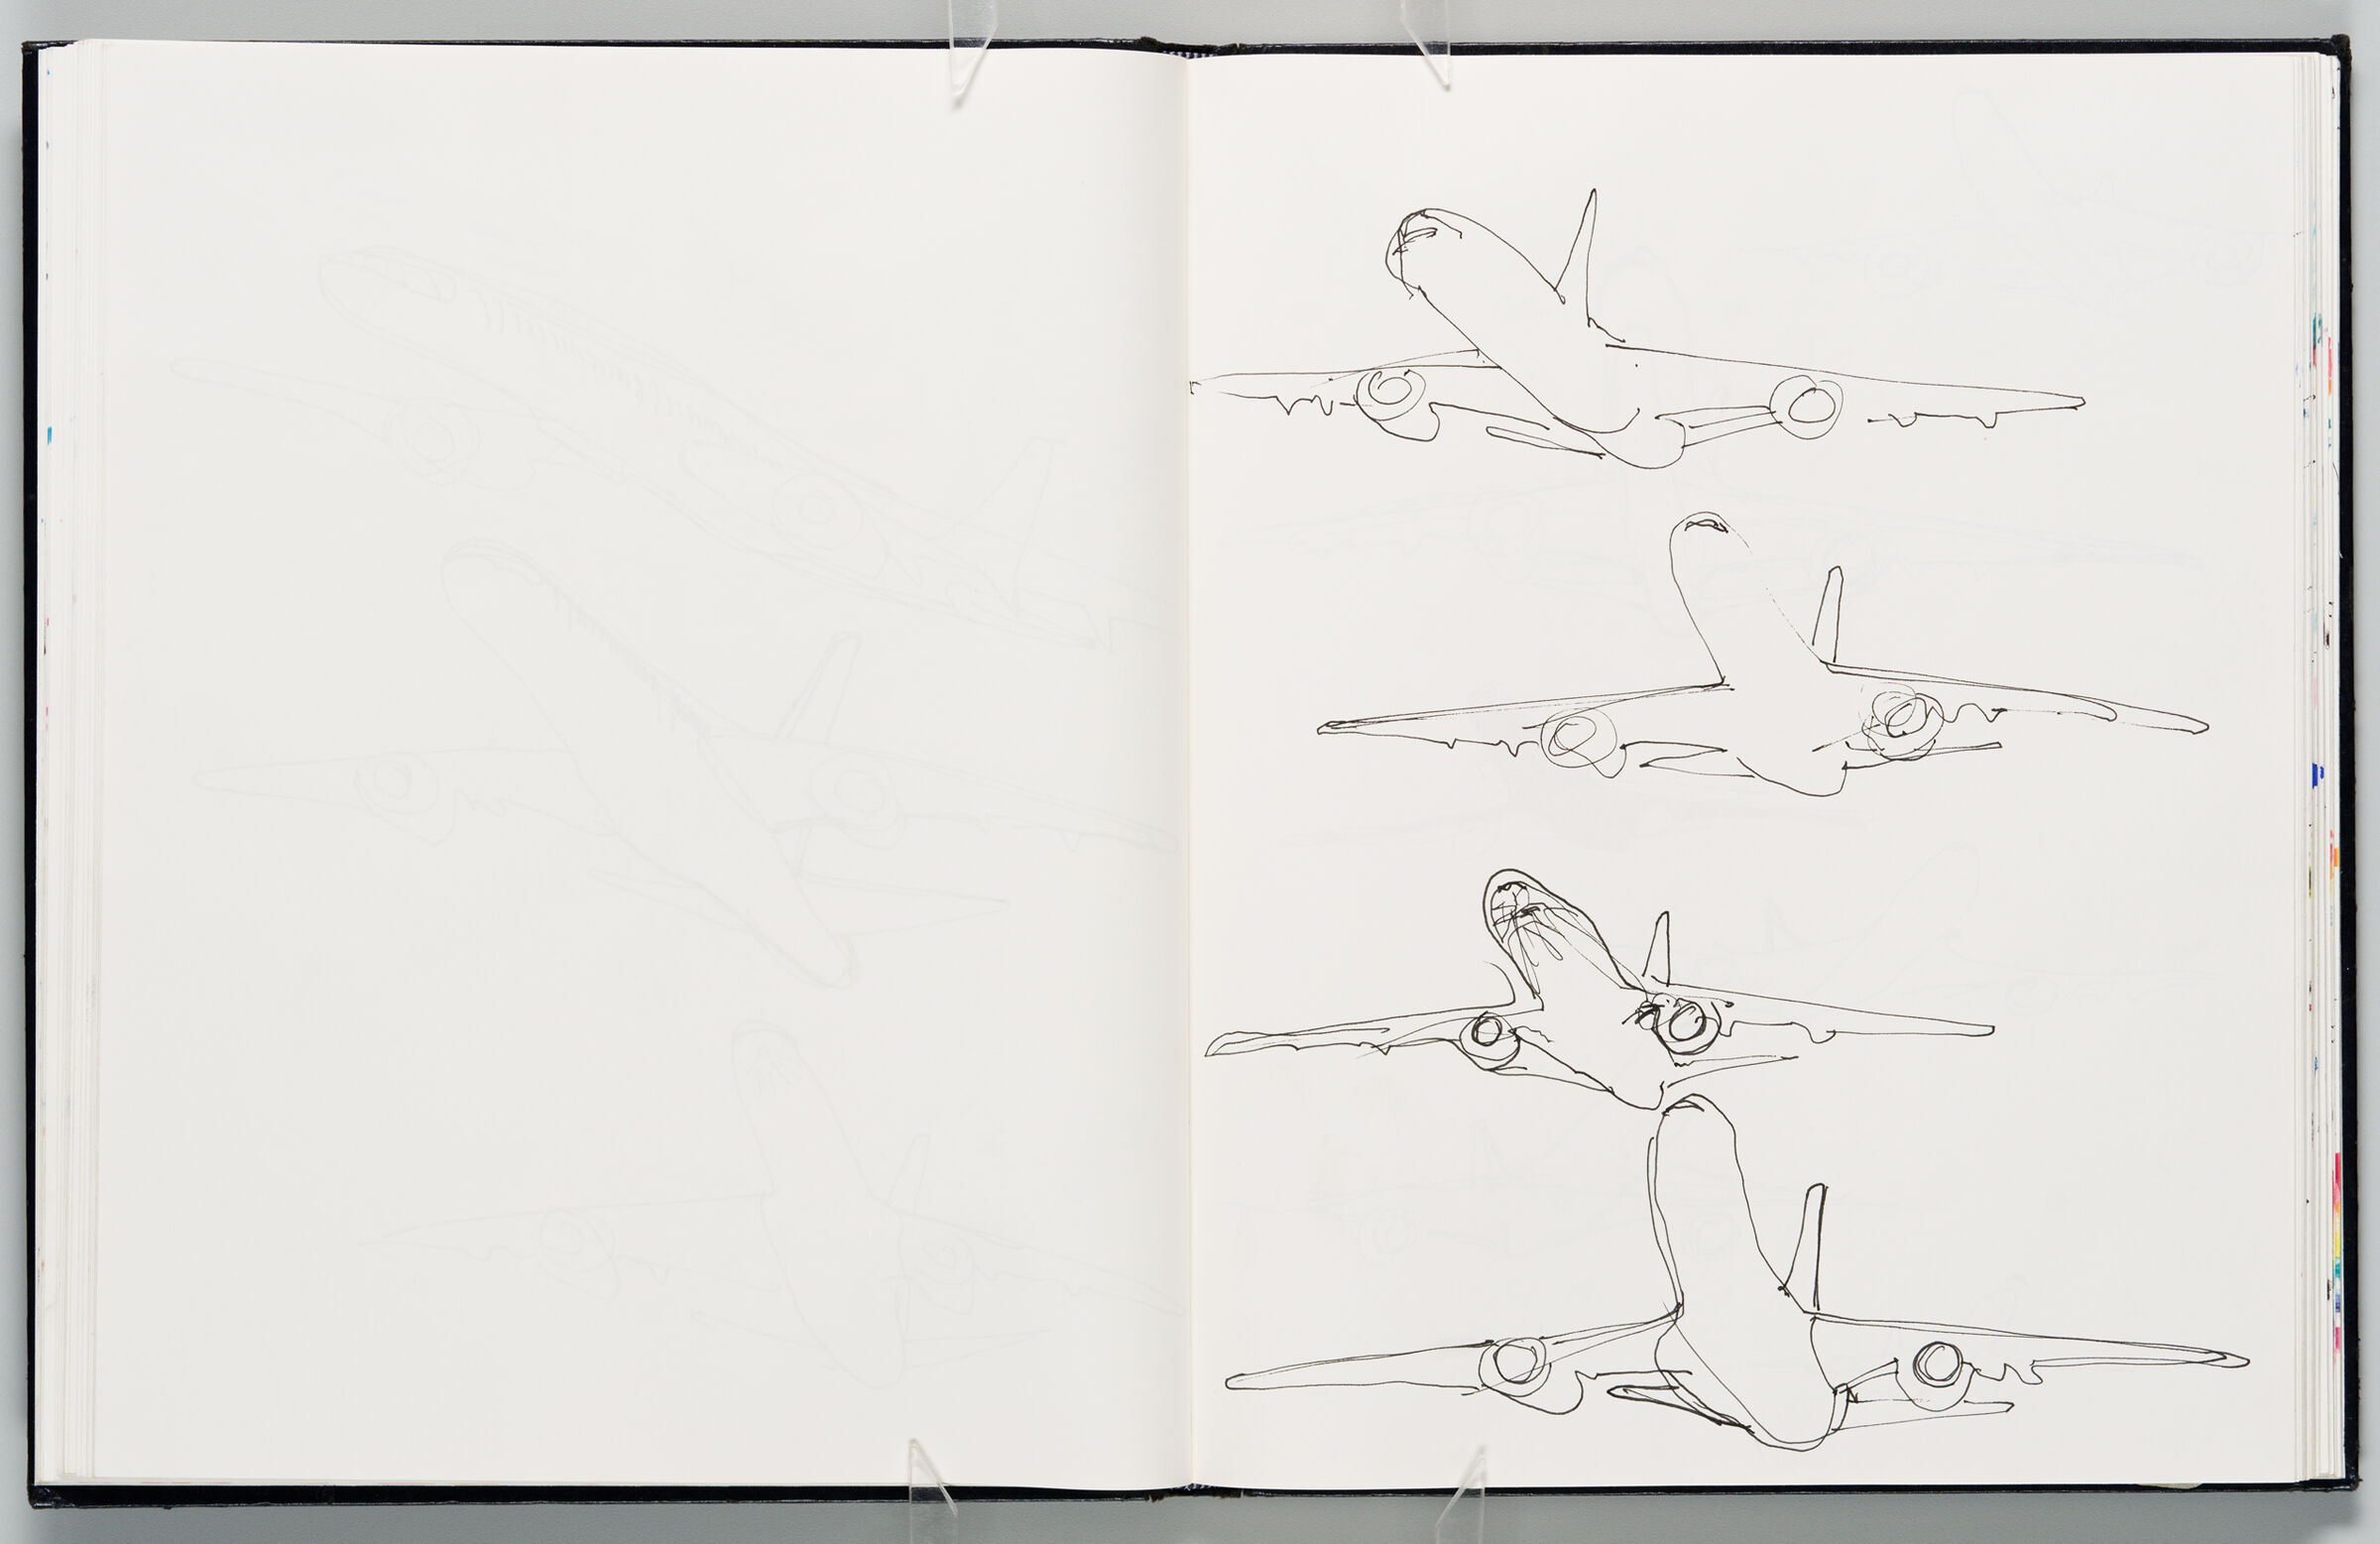 Untitled (Blank, Left Page); Untitled (Designs For Condor Planes, Right Page)